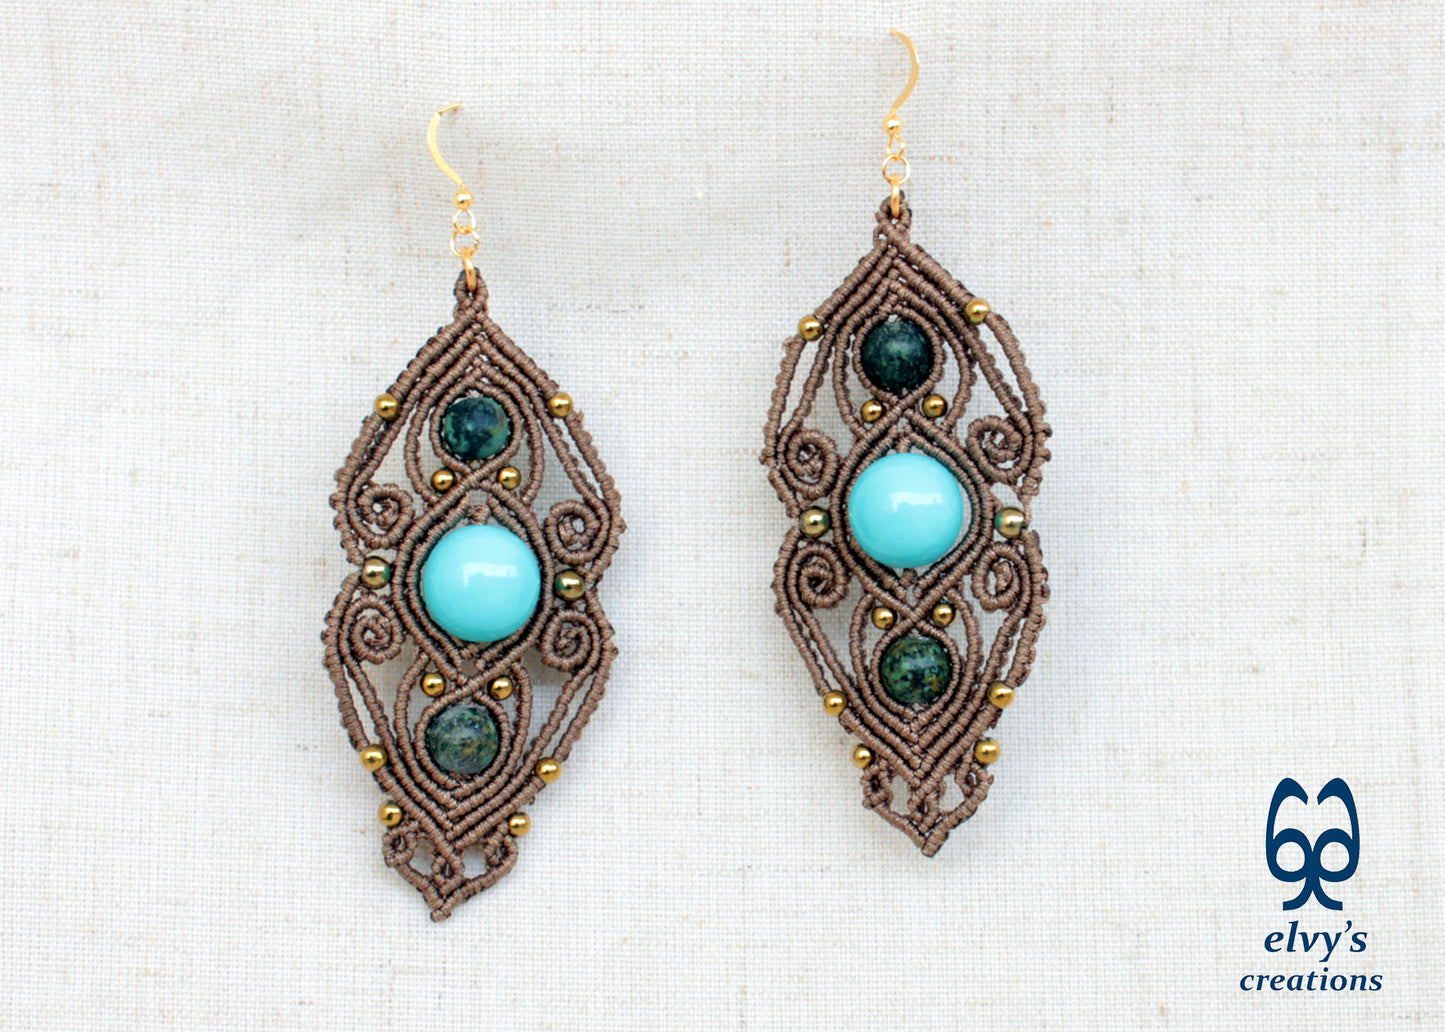 Rusty Gold Macrame Earrings with Turquoise Gemstones